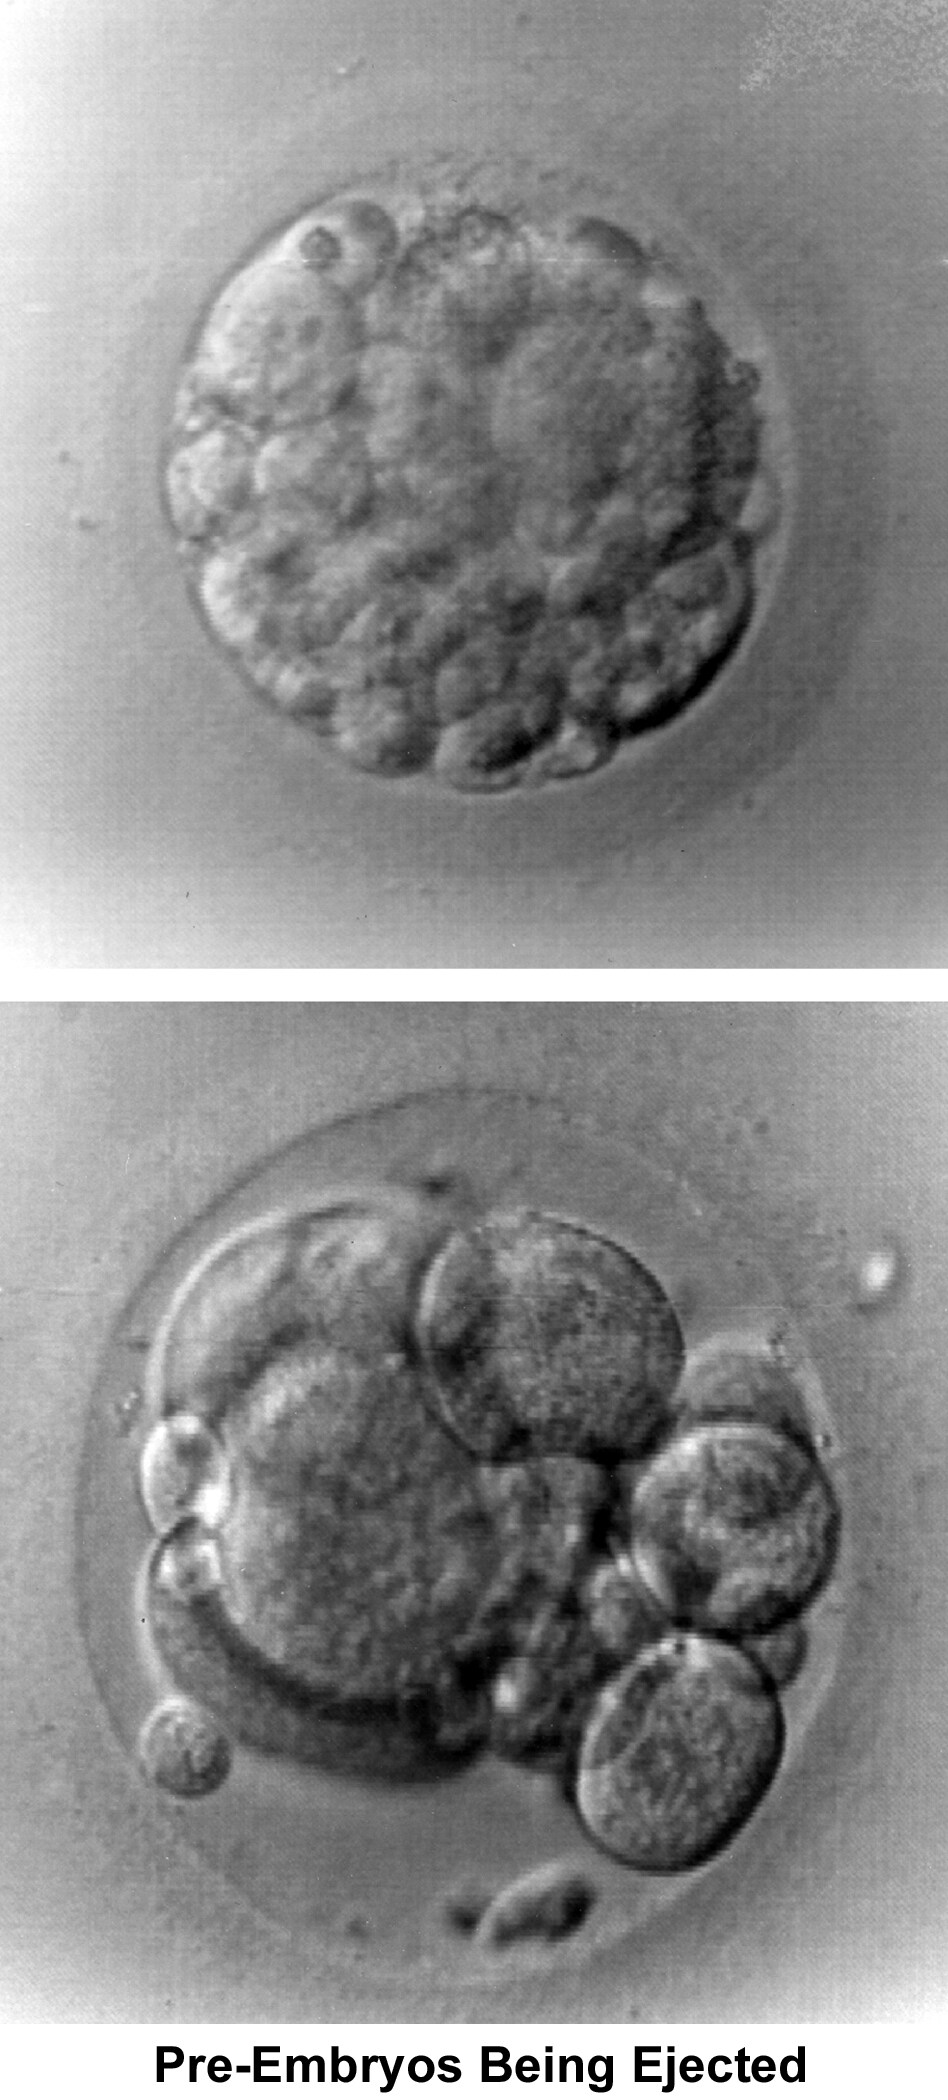 Infertility. Preembryos being ejected. Image cou...